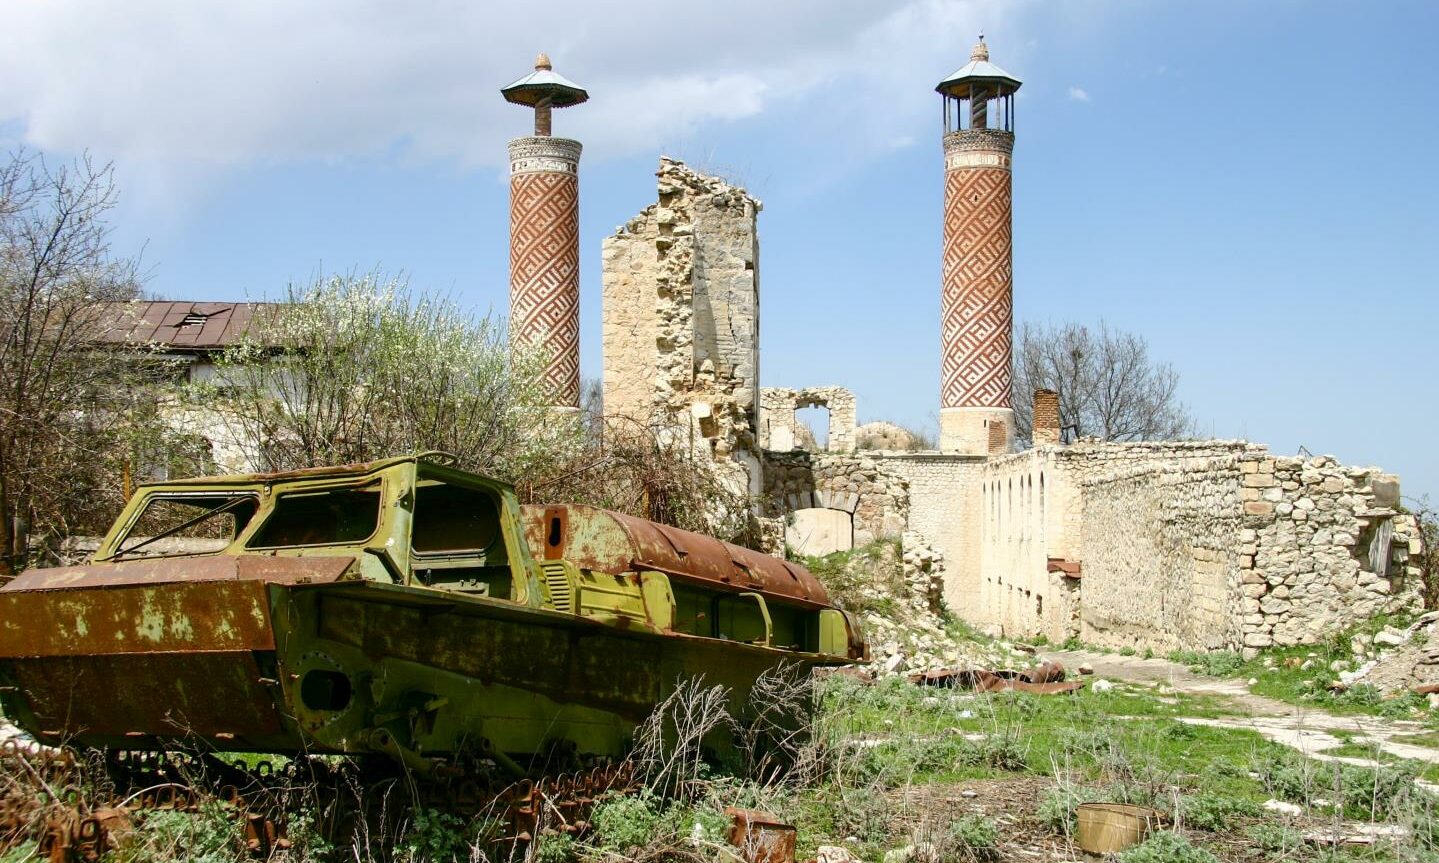 Destroyed armored vehicle, and Ruins of the Azerbaijani part of Shusha.